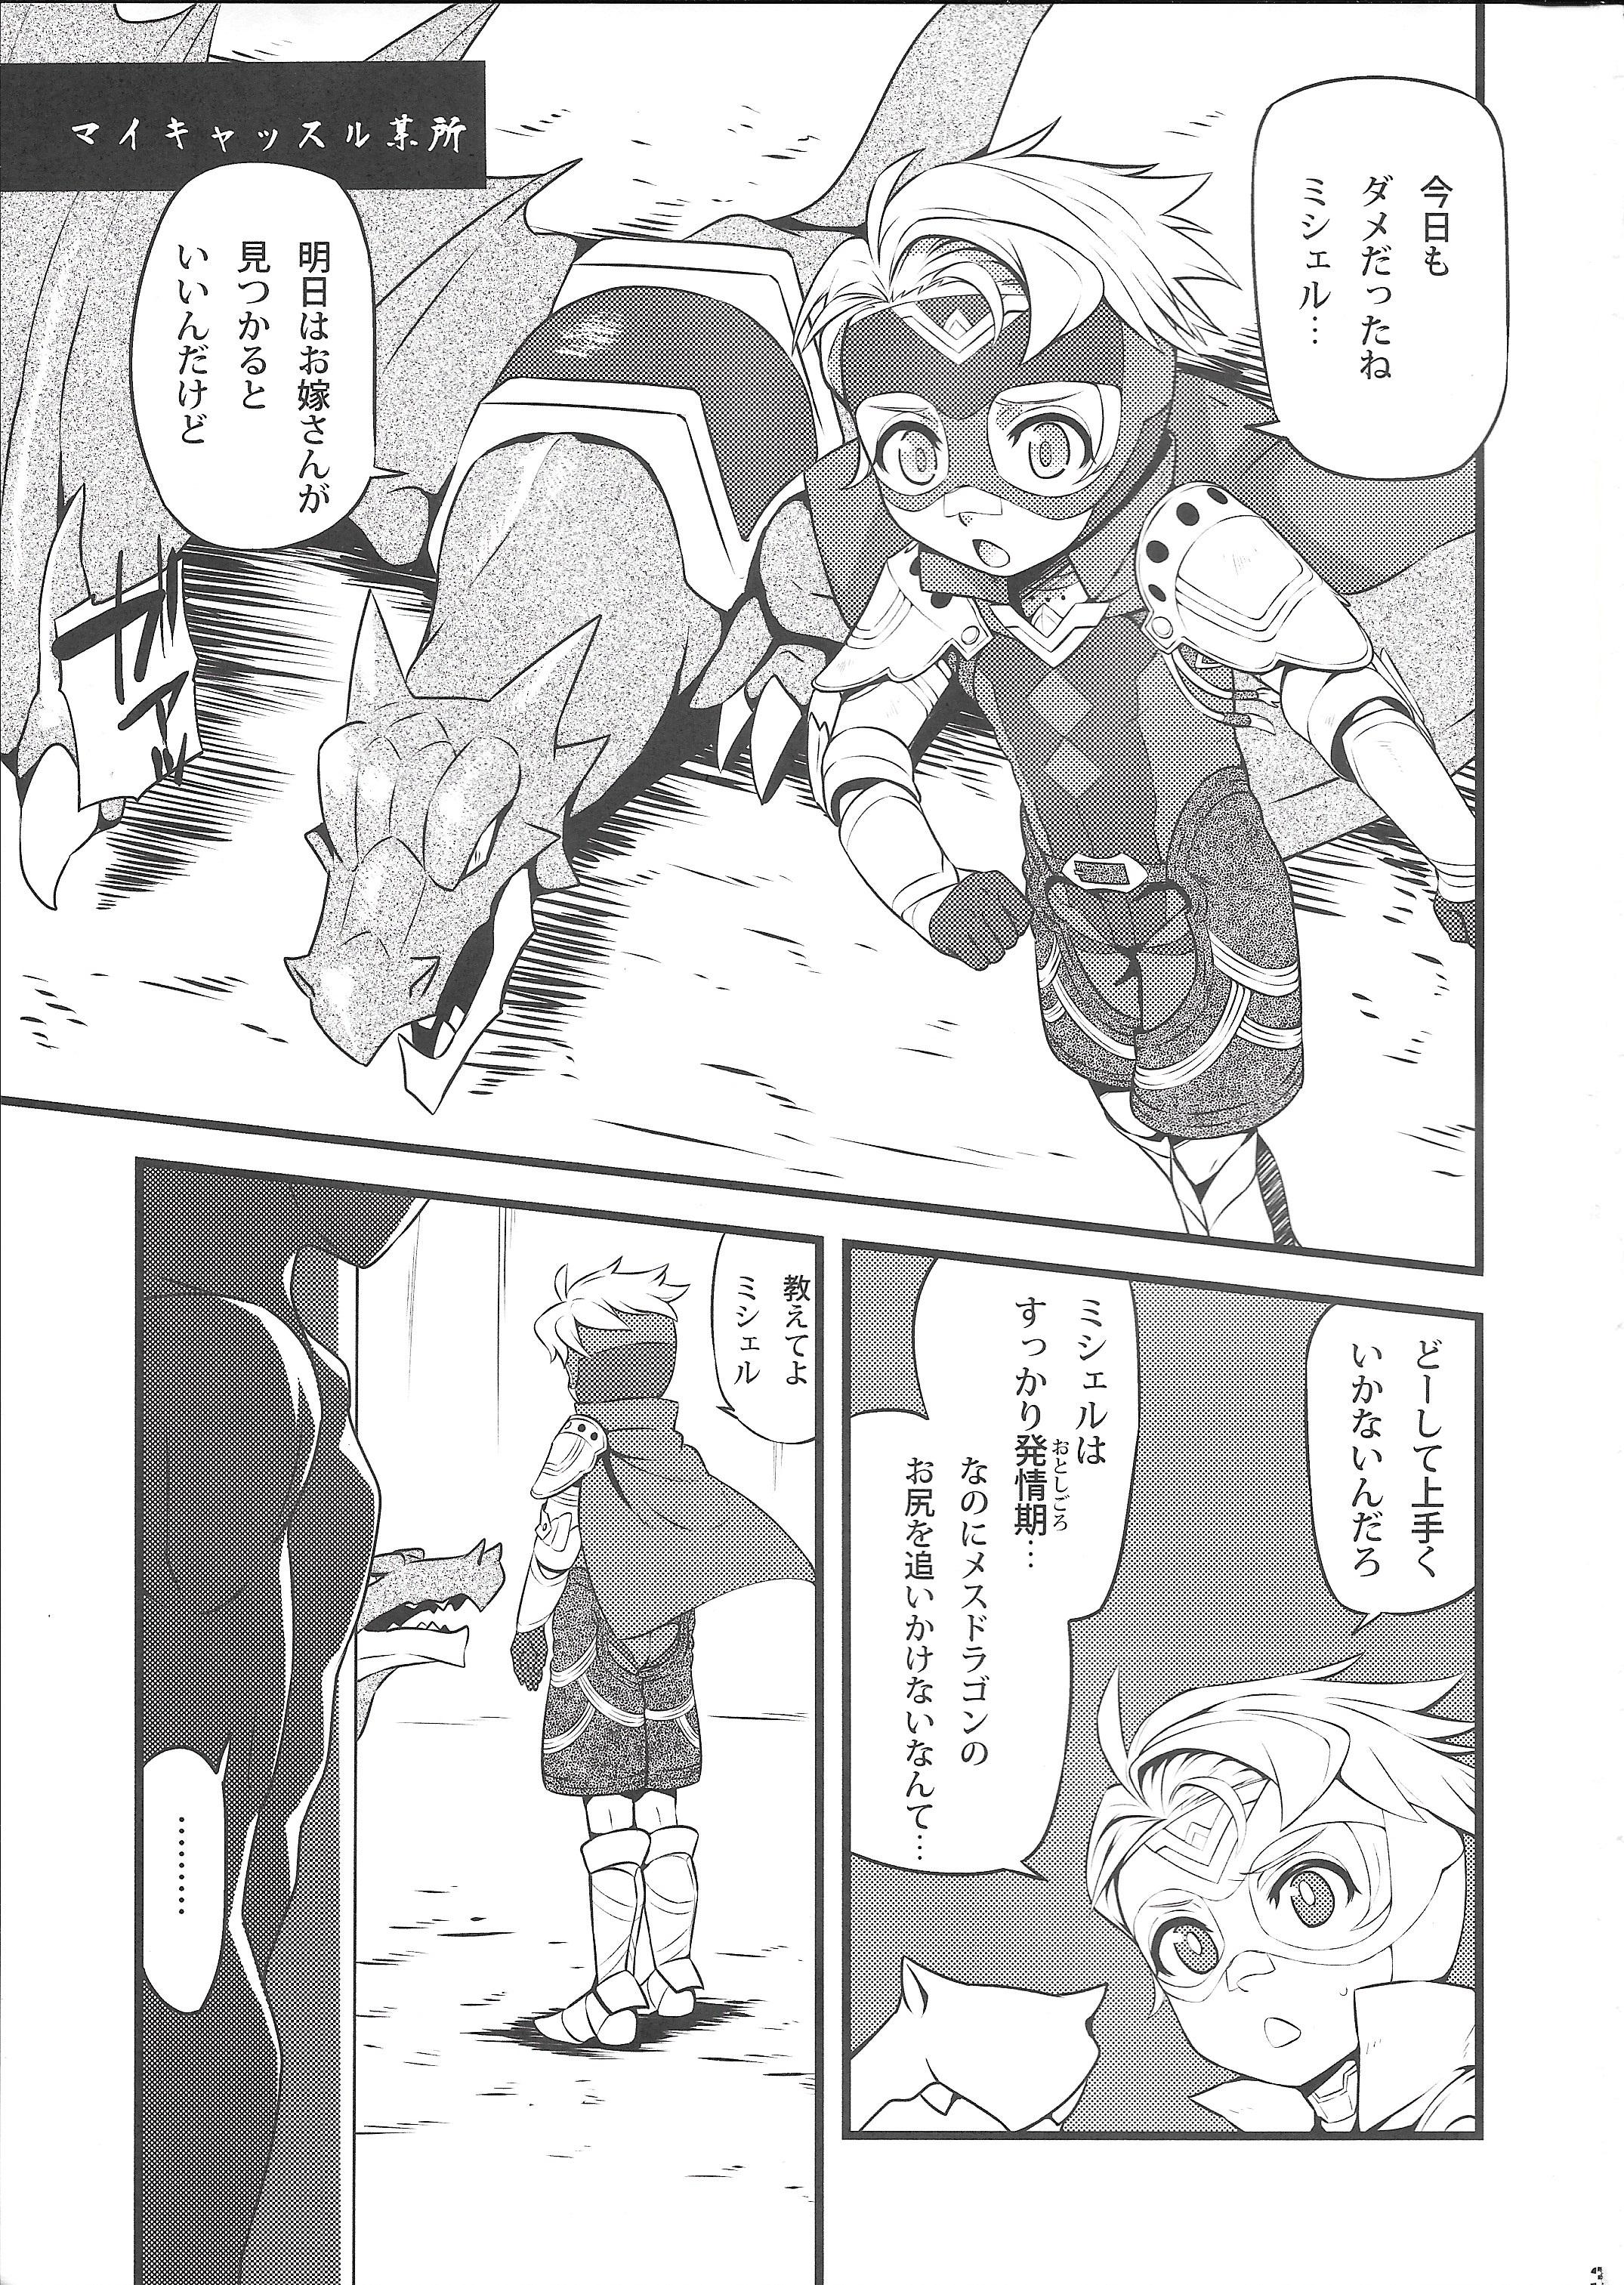 Teenxxx September 5 to 8 - Fire emblem if Toy - Page 2